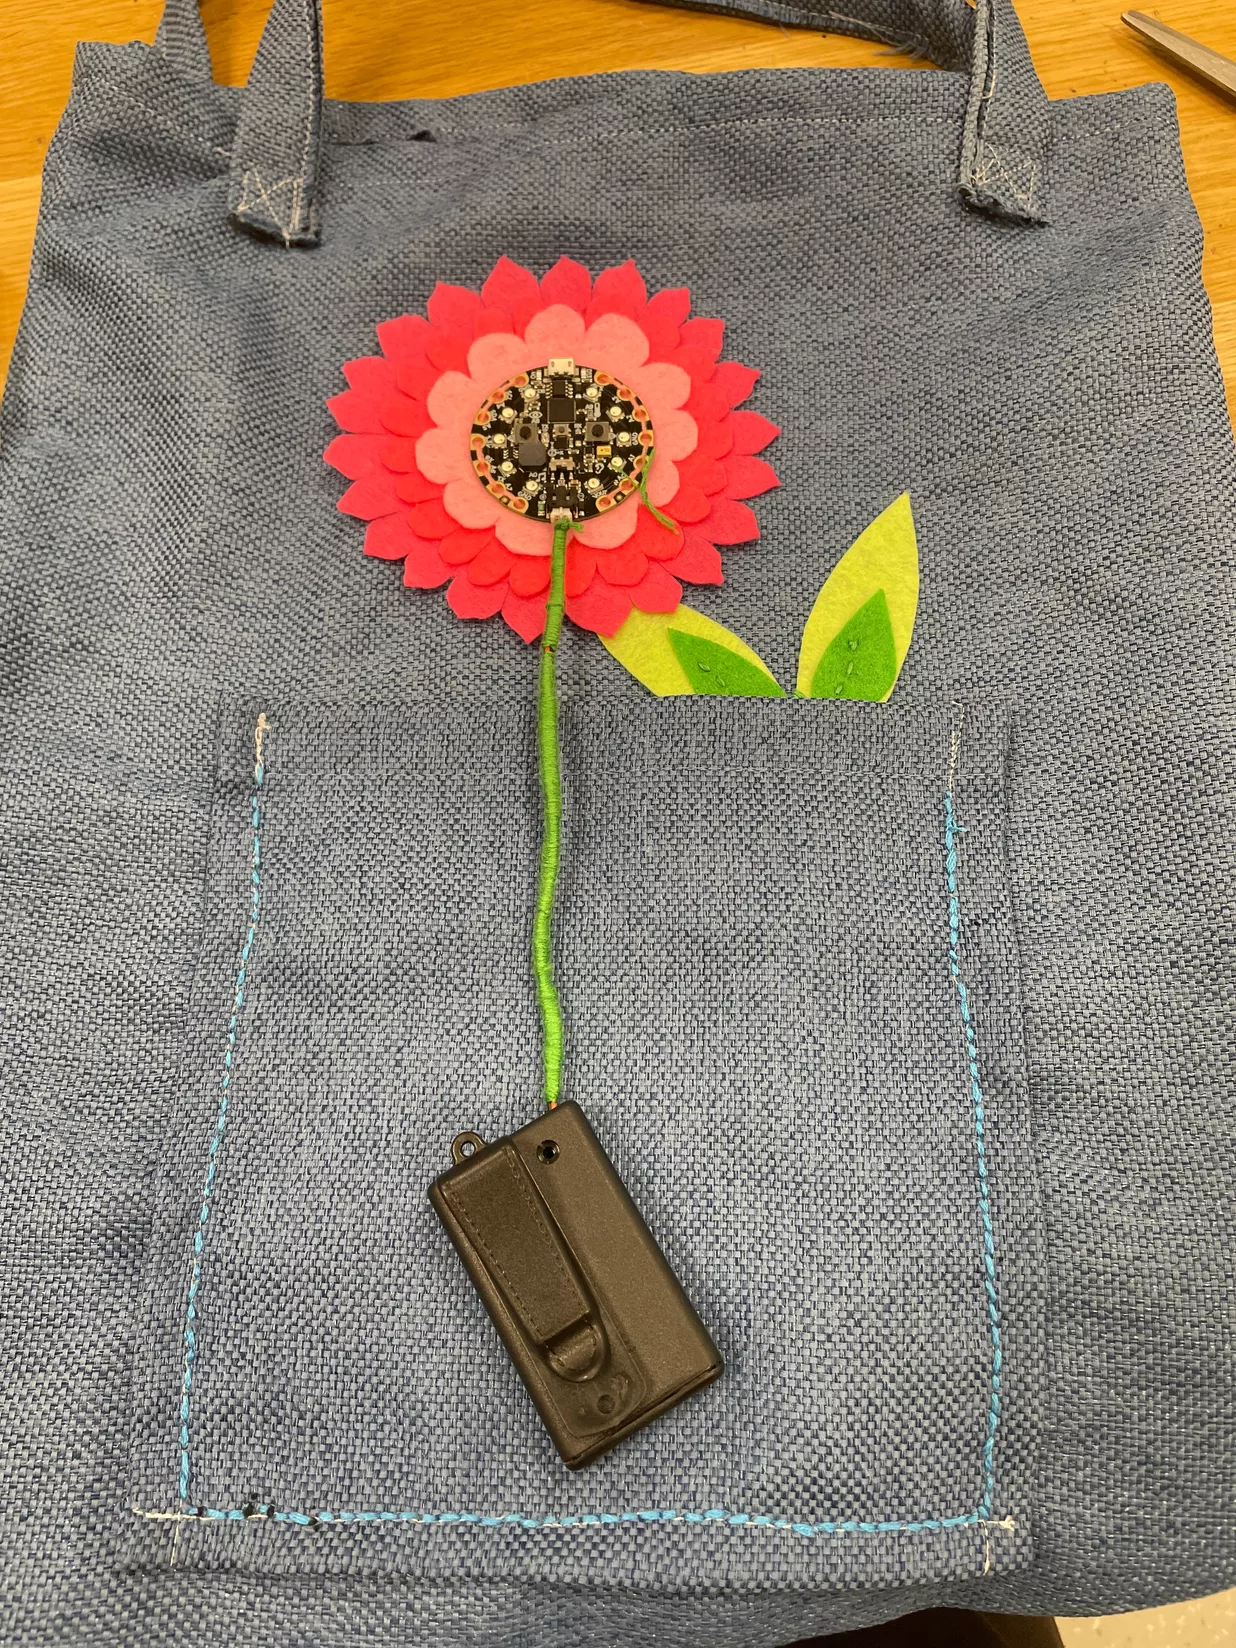 Tote Bag With Adafruit Circuit Playground Expressed Flower Design